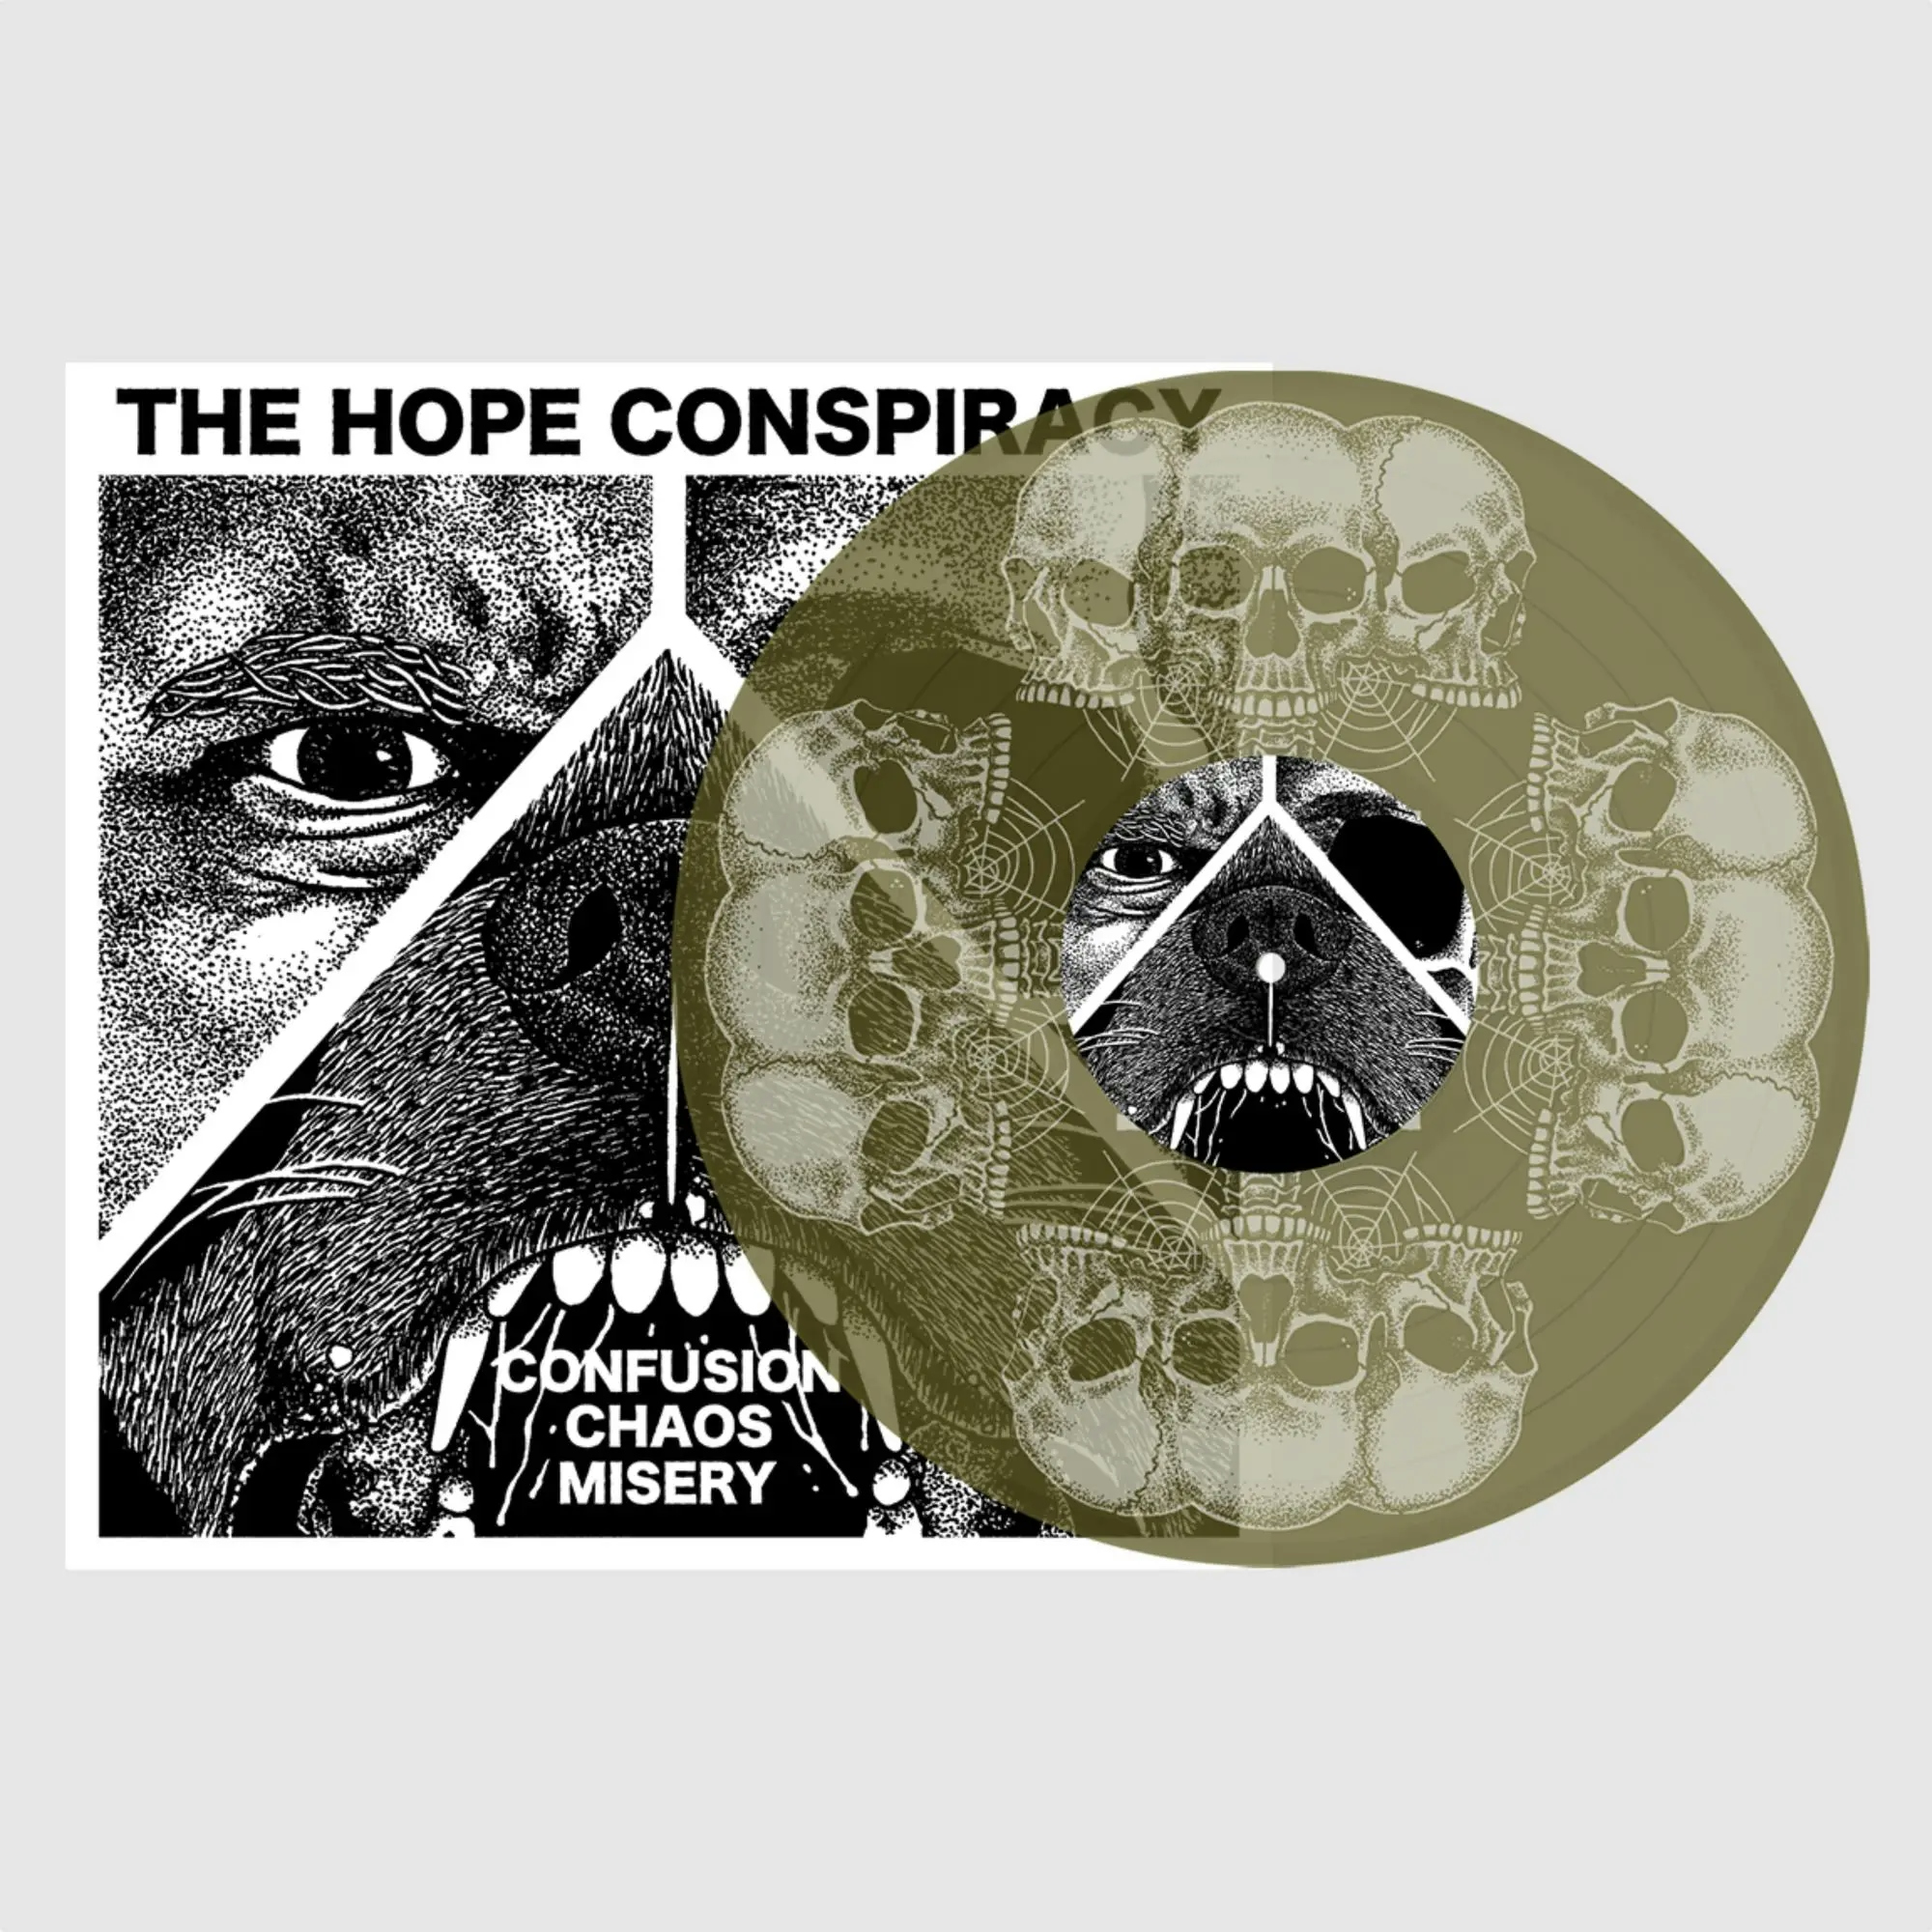 Album artwork for Confusion/Chaos/Misery by The Hope Conspiracy